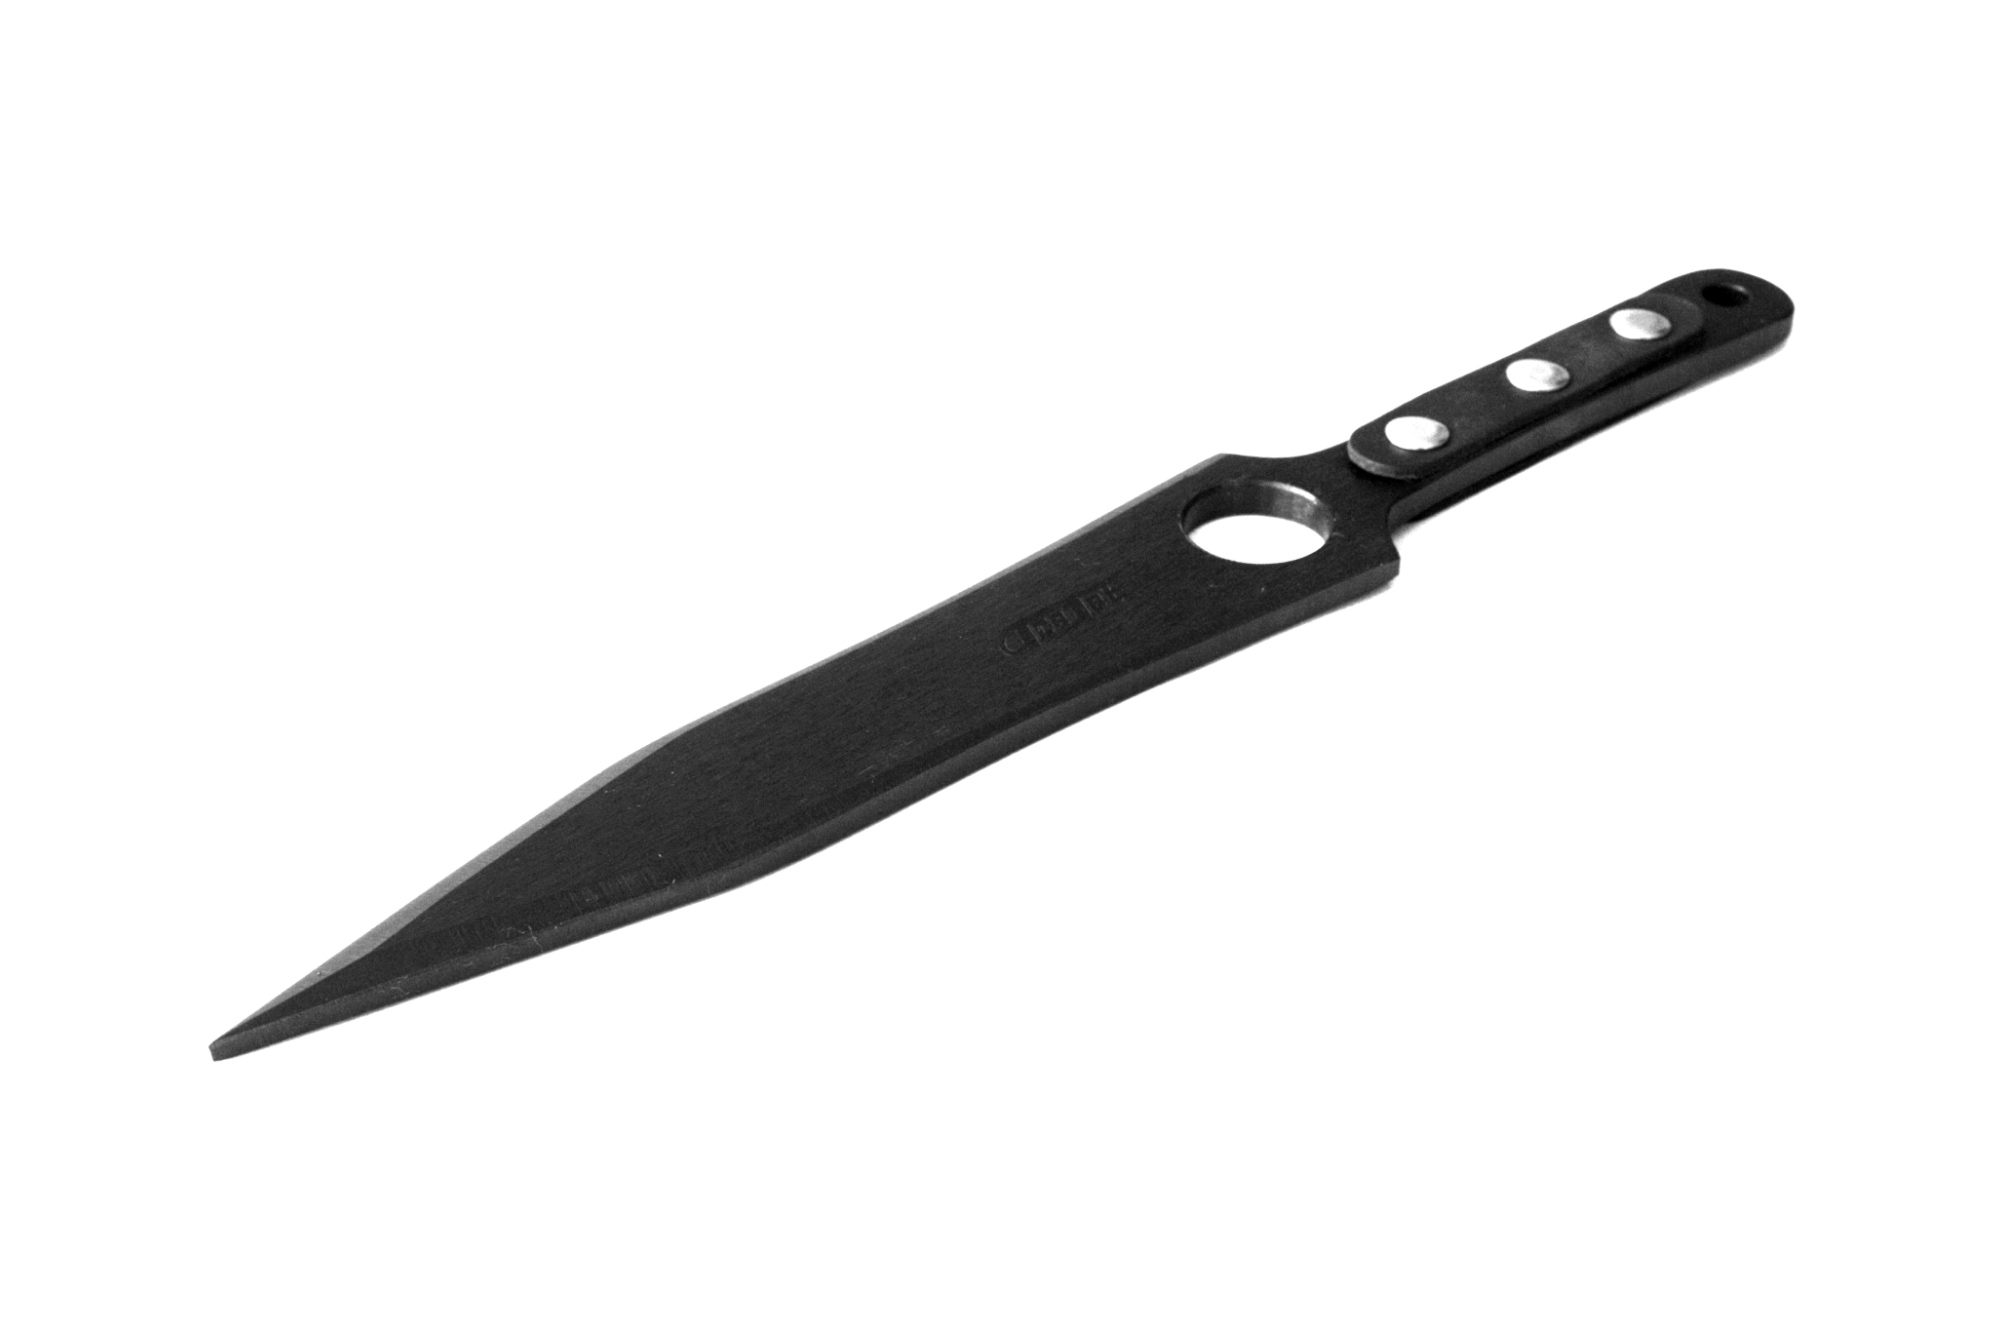 ACEJET MAXIMUS SHADOW - Spinner Throwing knife